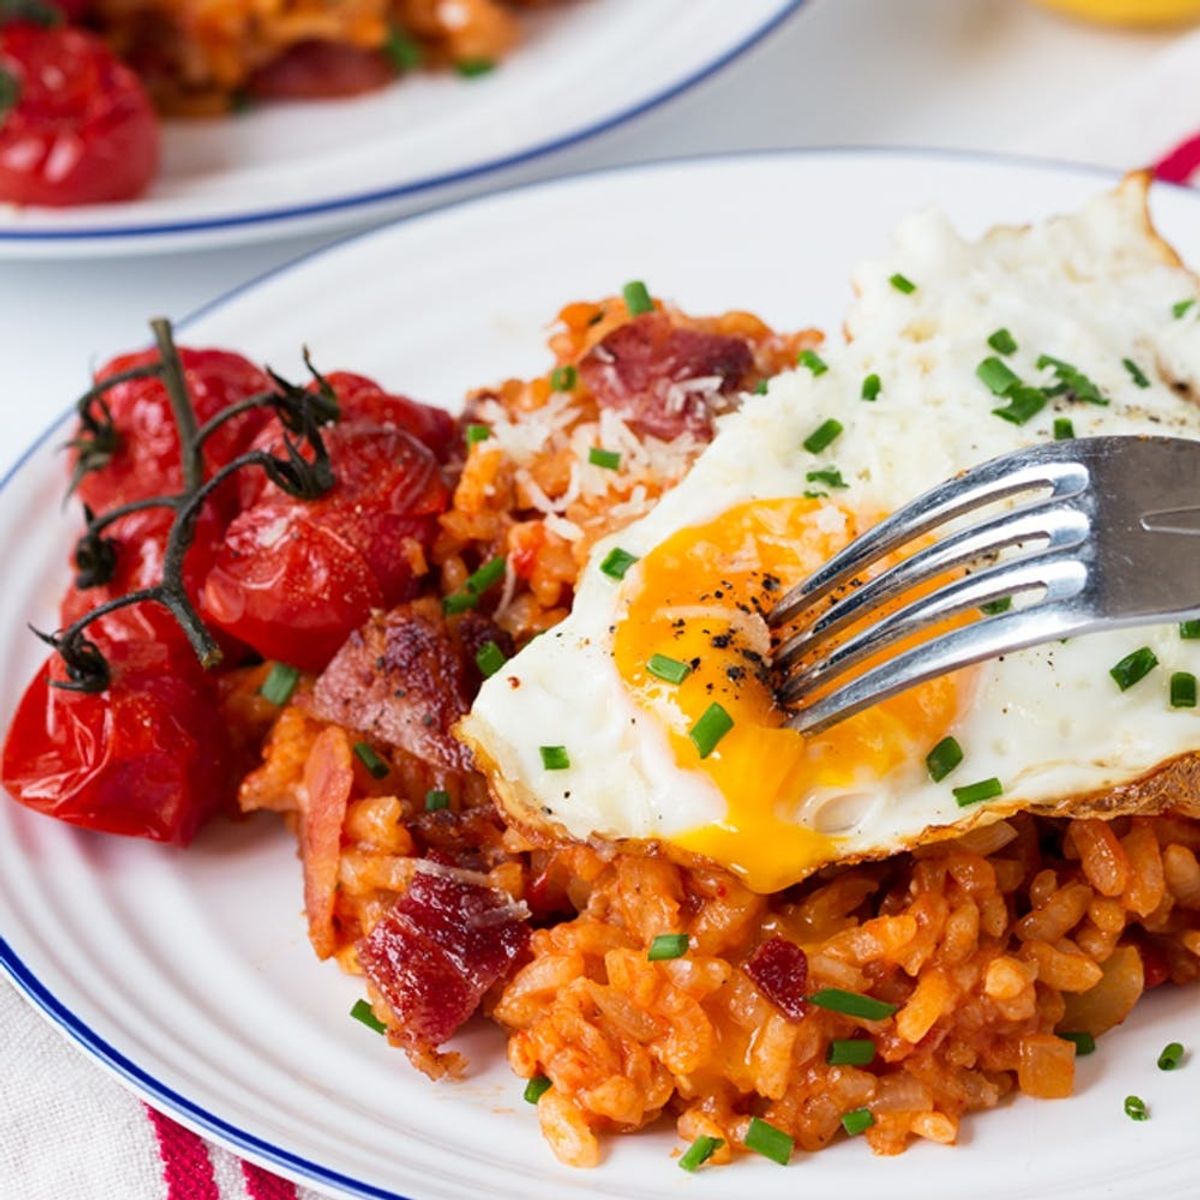 How to Make Bacon and Egg Risotto for Breakfast